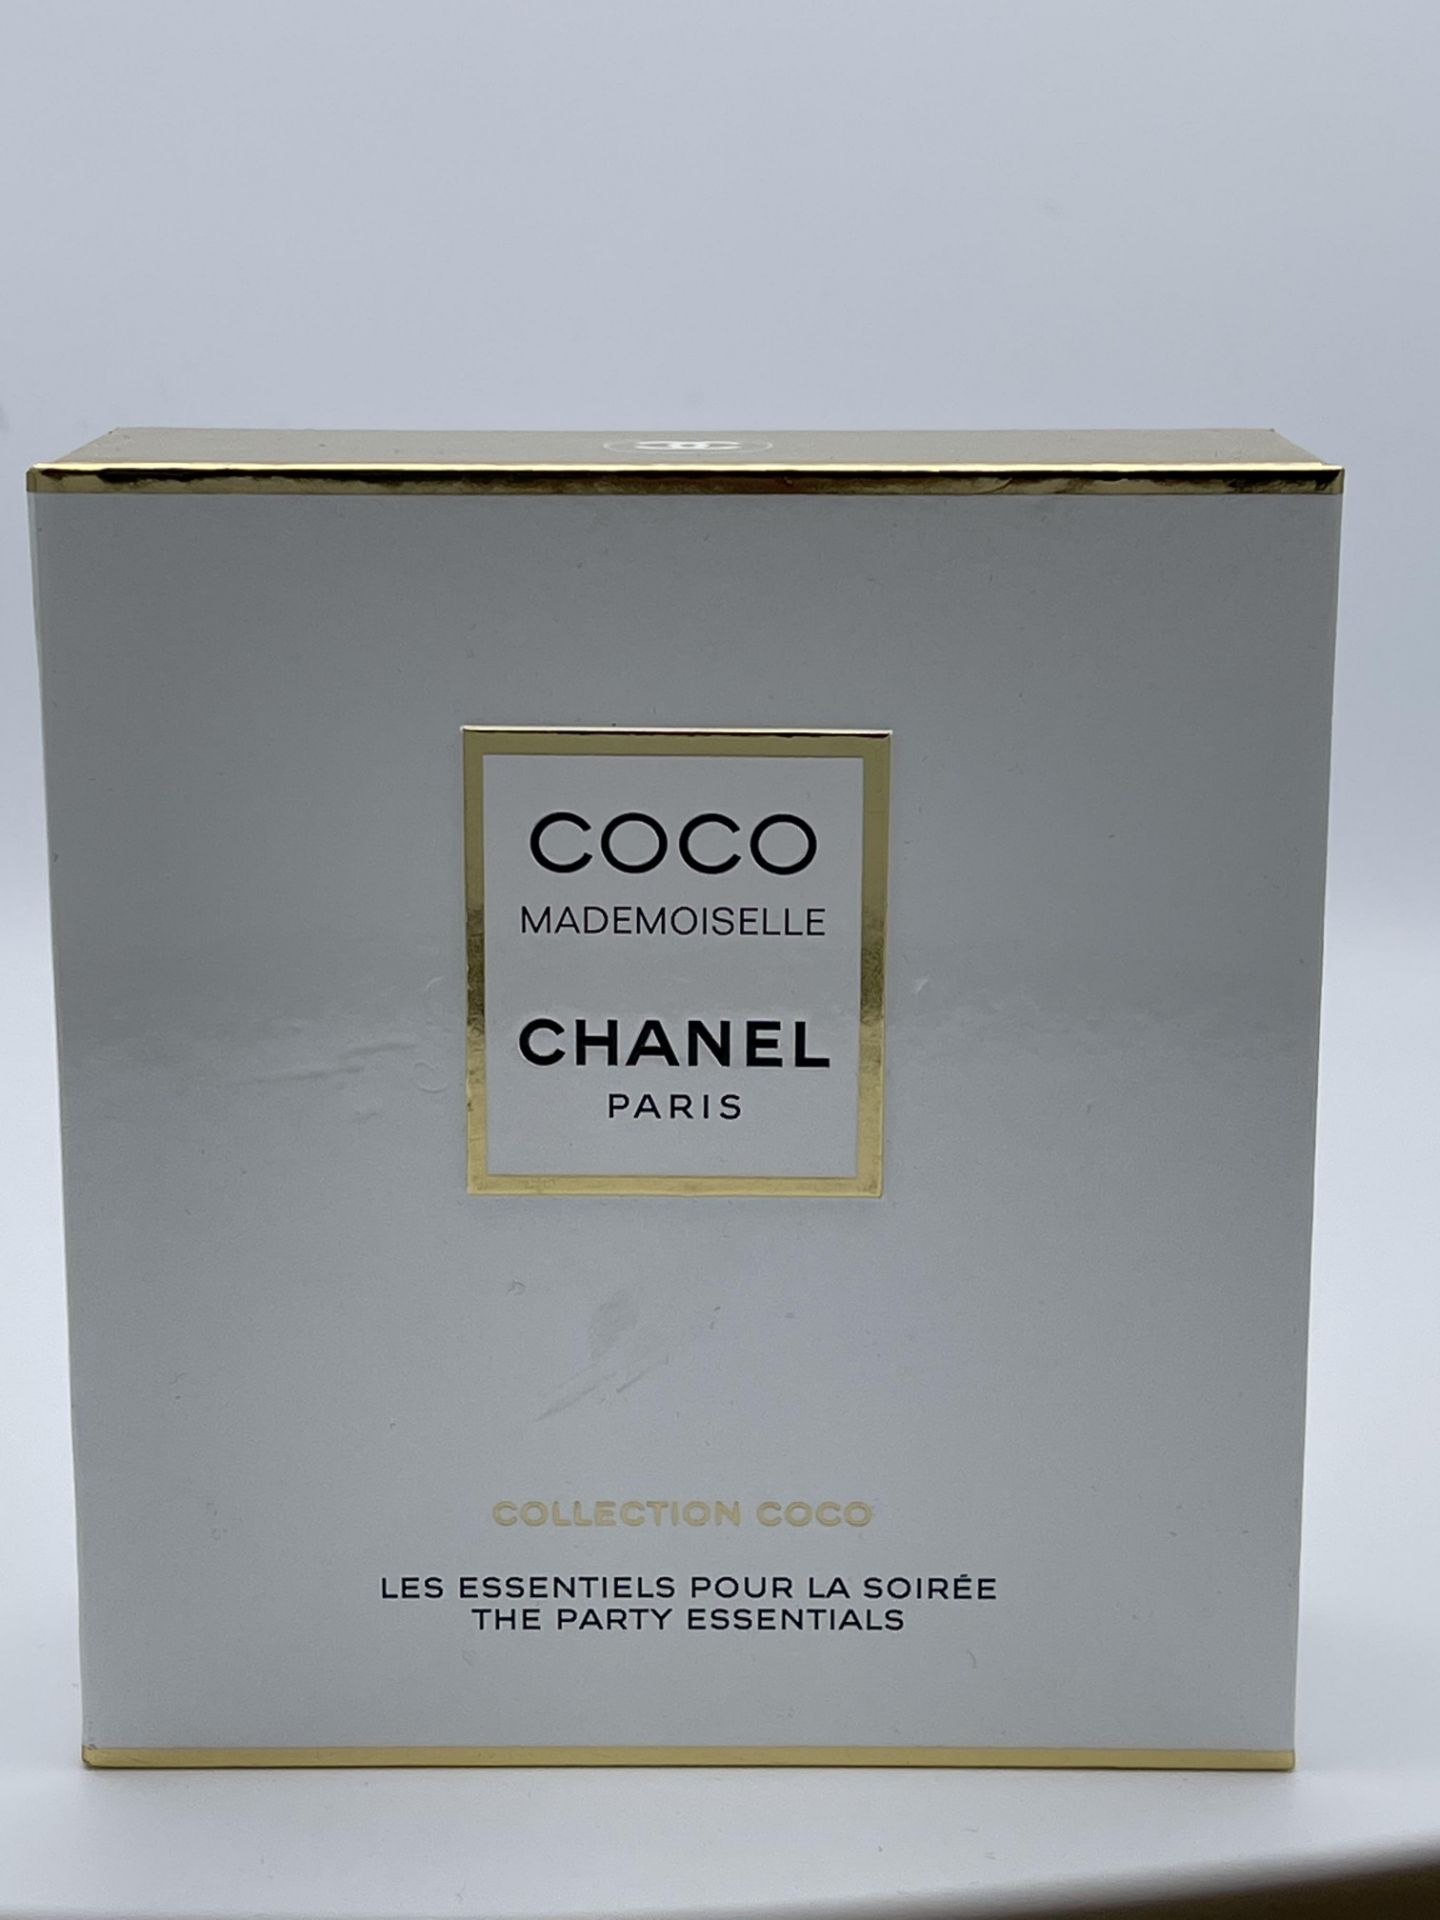 BOXED COCO MADEMOISELLE CHANEL PARIS COLLECTION COCO, INCLUDES 35ML EAU DE PARFUM AND ROUGE COCO - Image 3 of 3